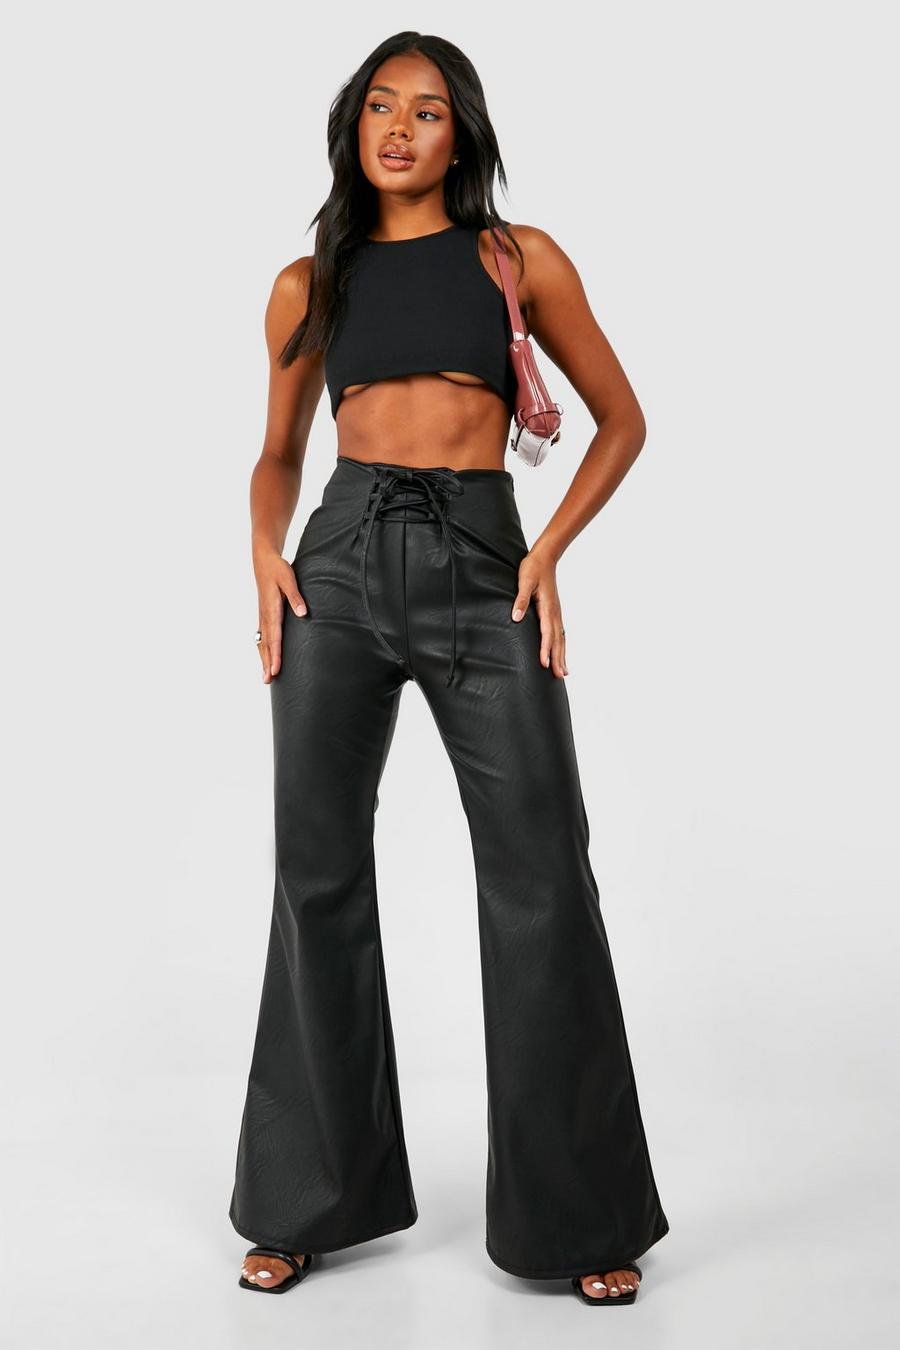 Black Leather Look Lace Up Flared Pants